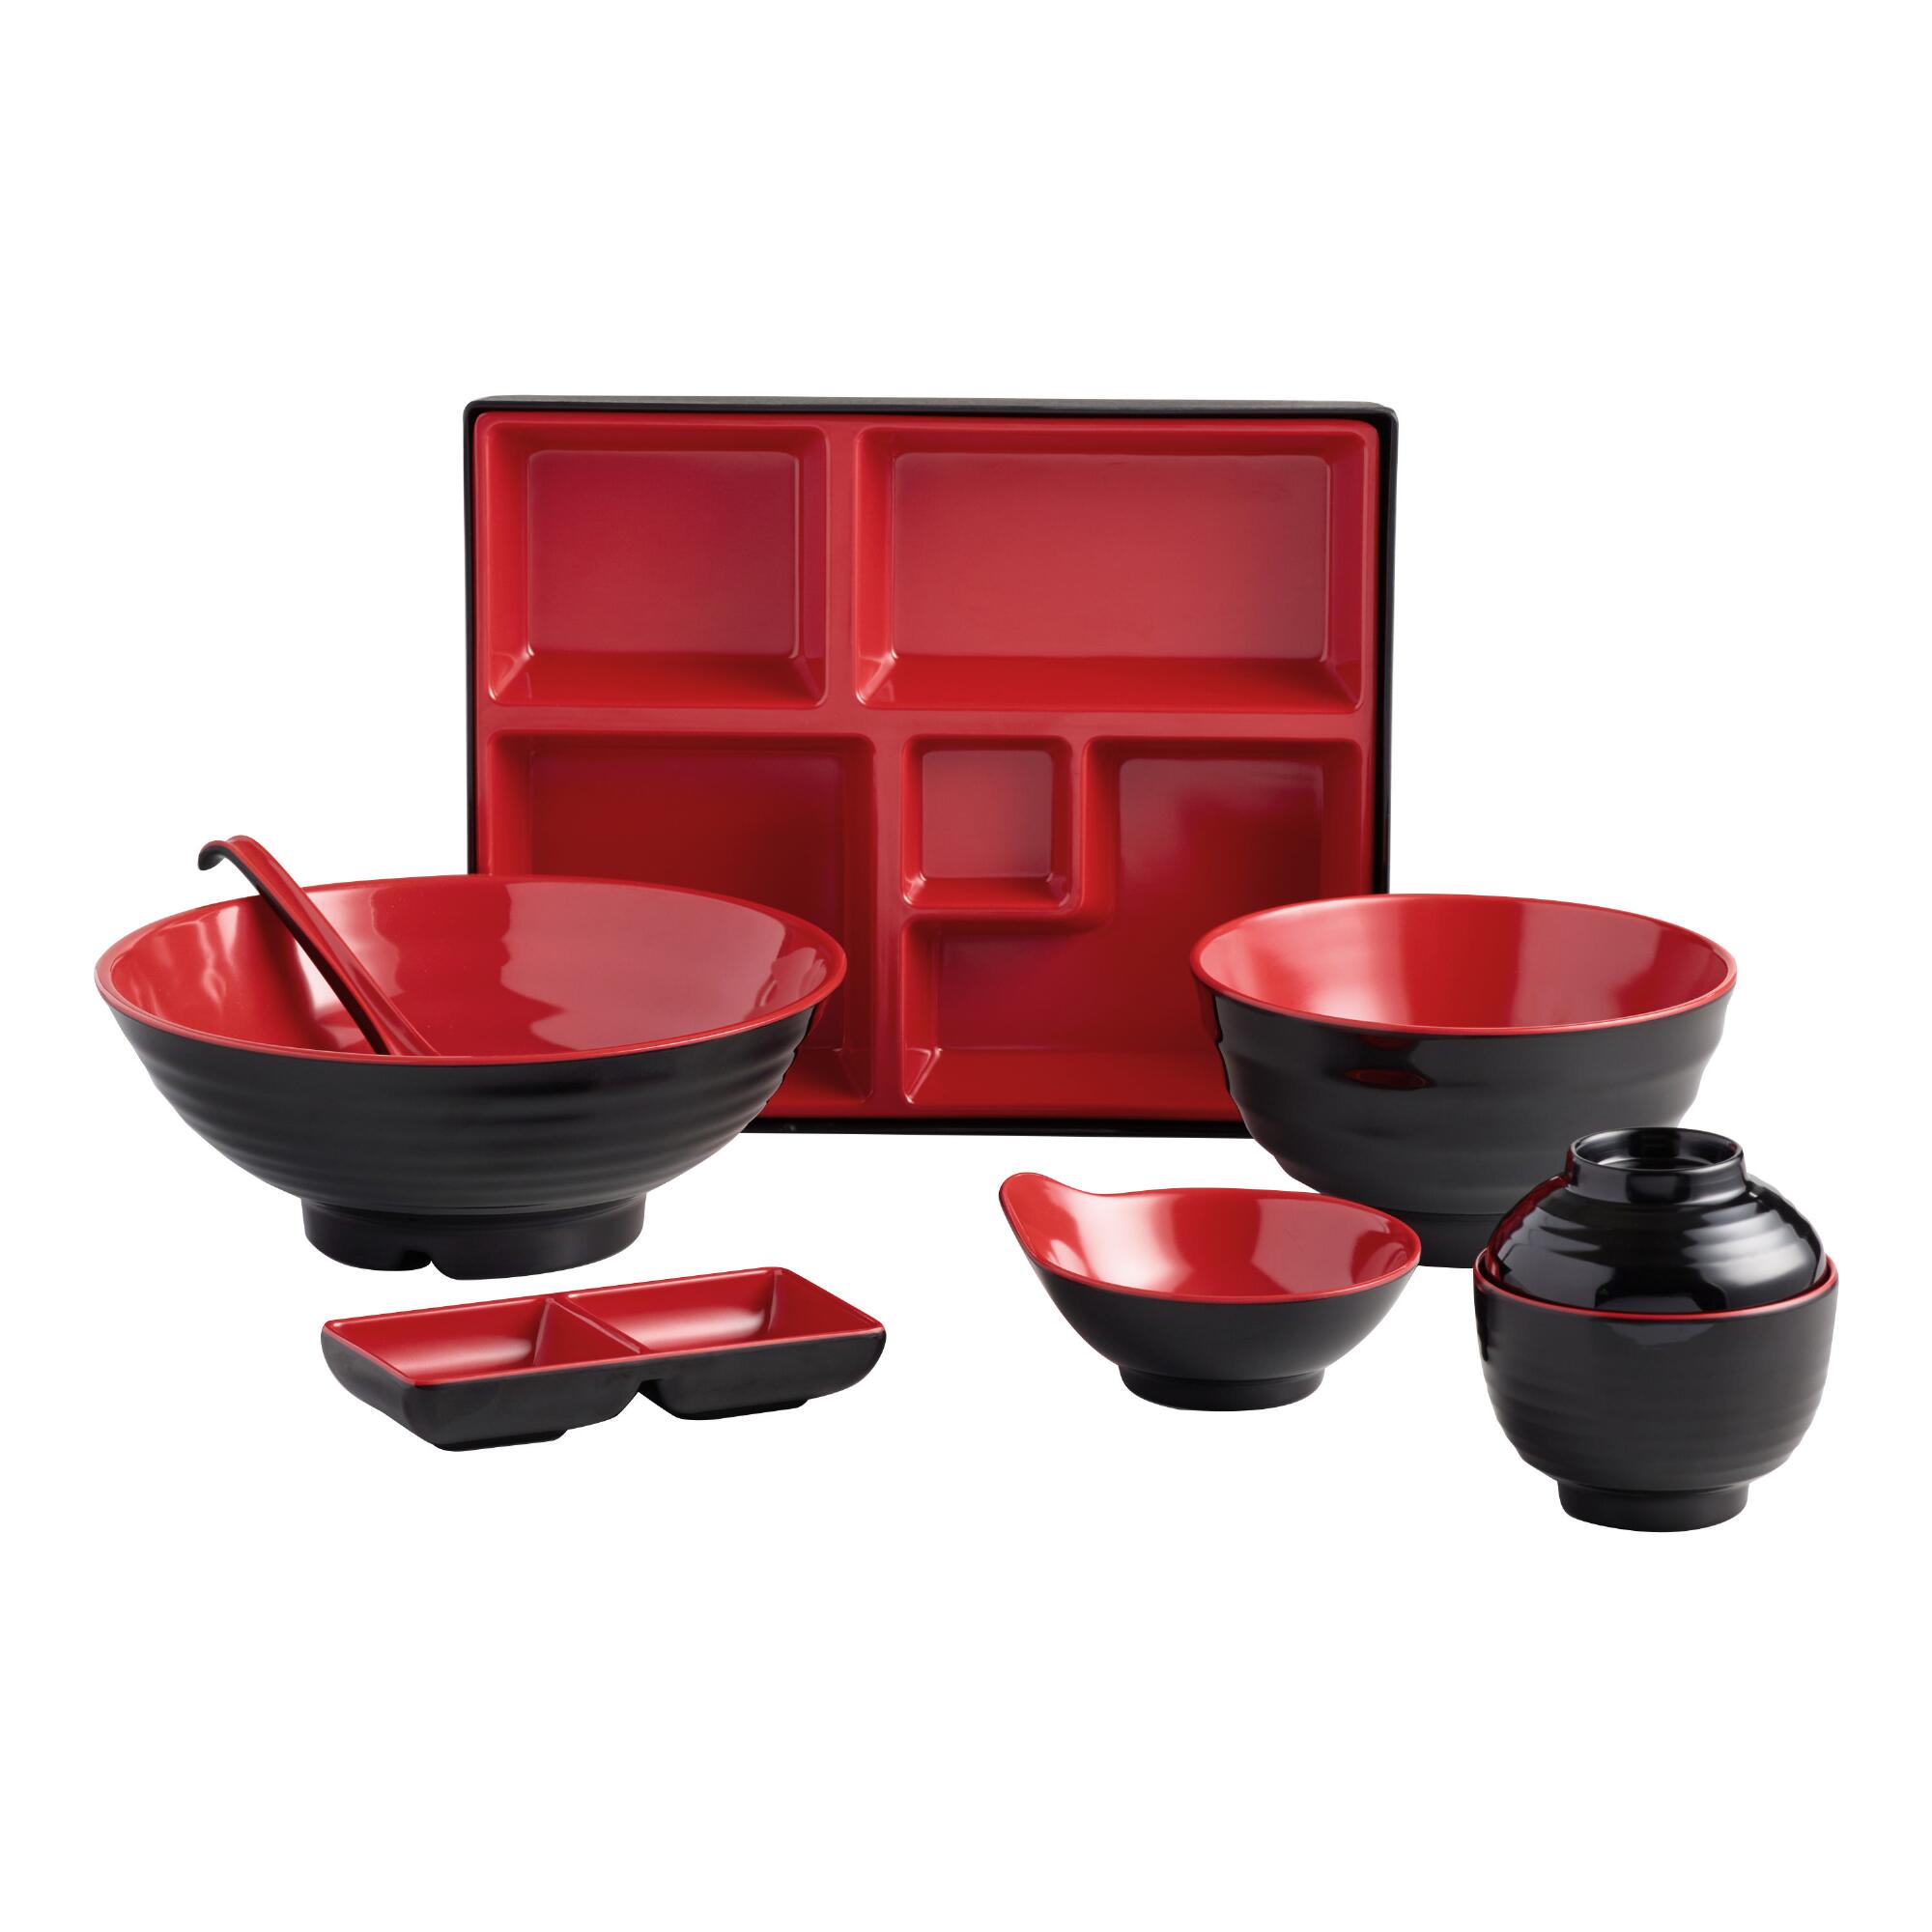 Black and Red Melamine Dinnerware Collection by World Market